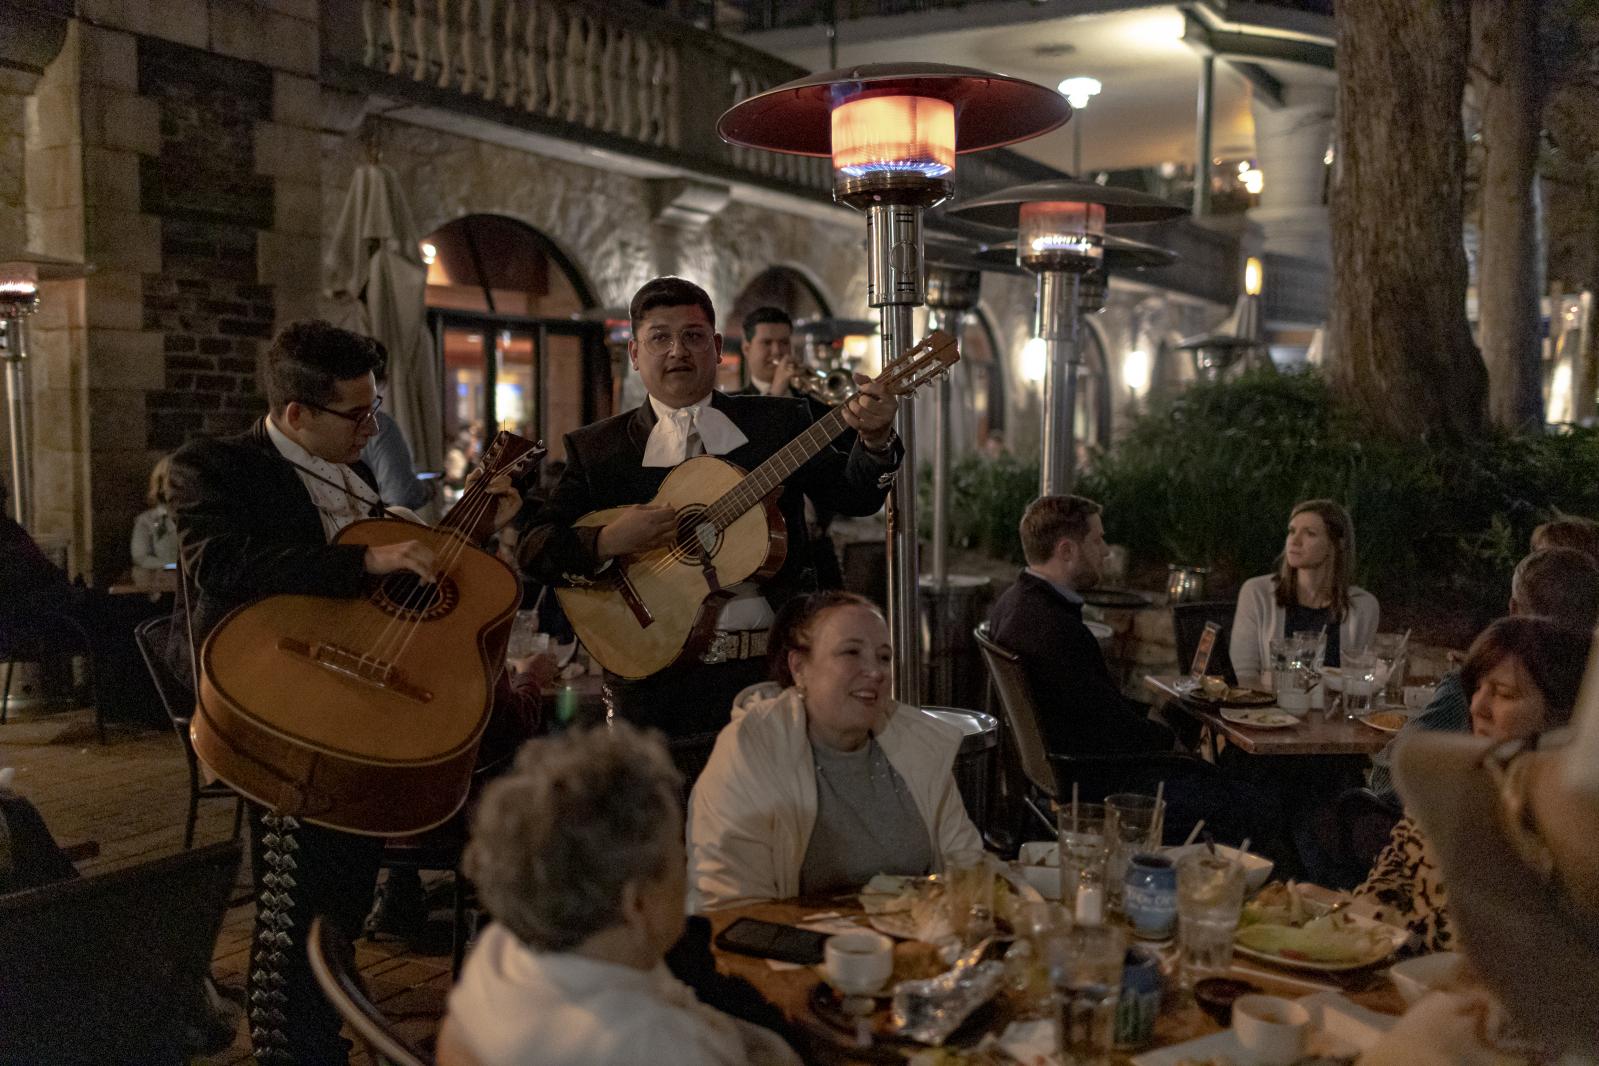 A group of mariachis performs i... public places to be monitored.